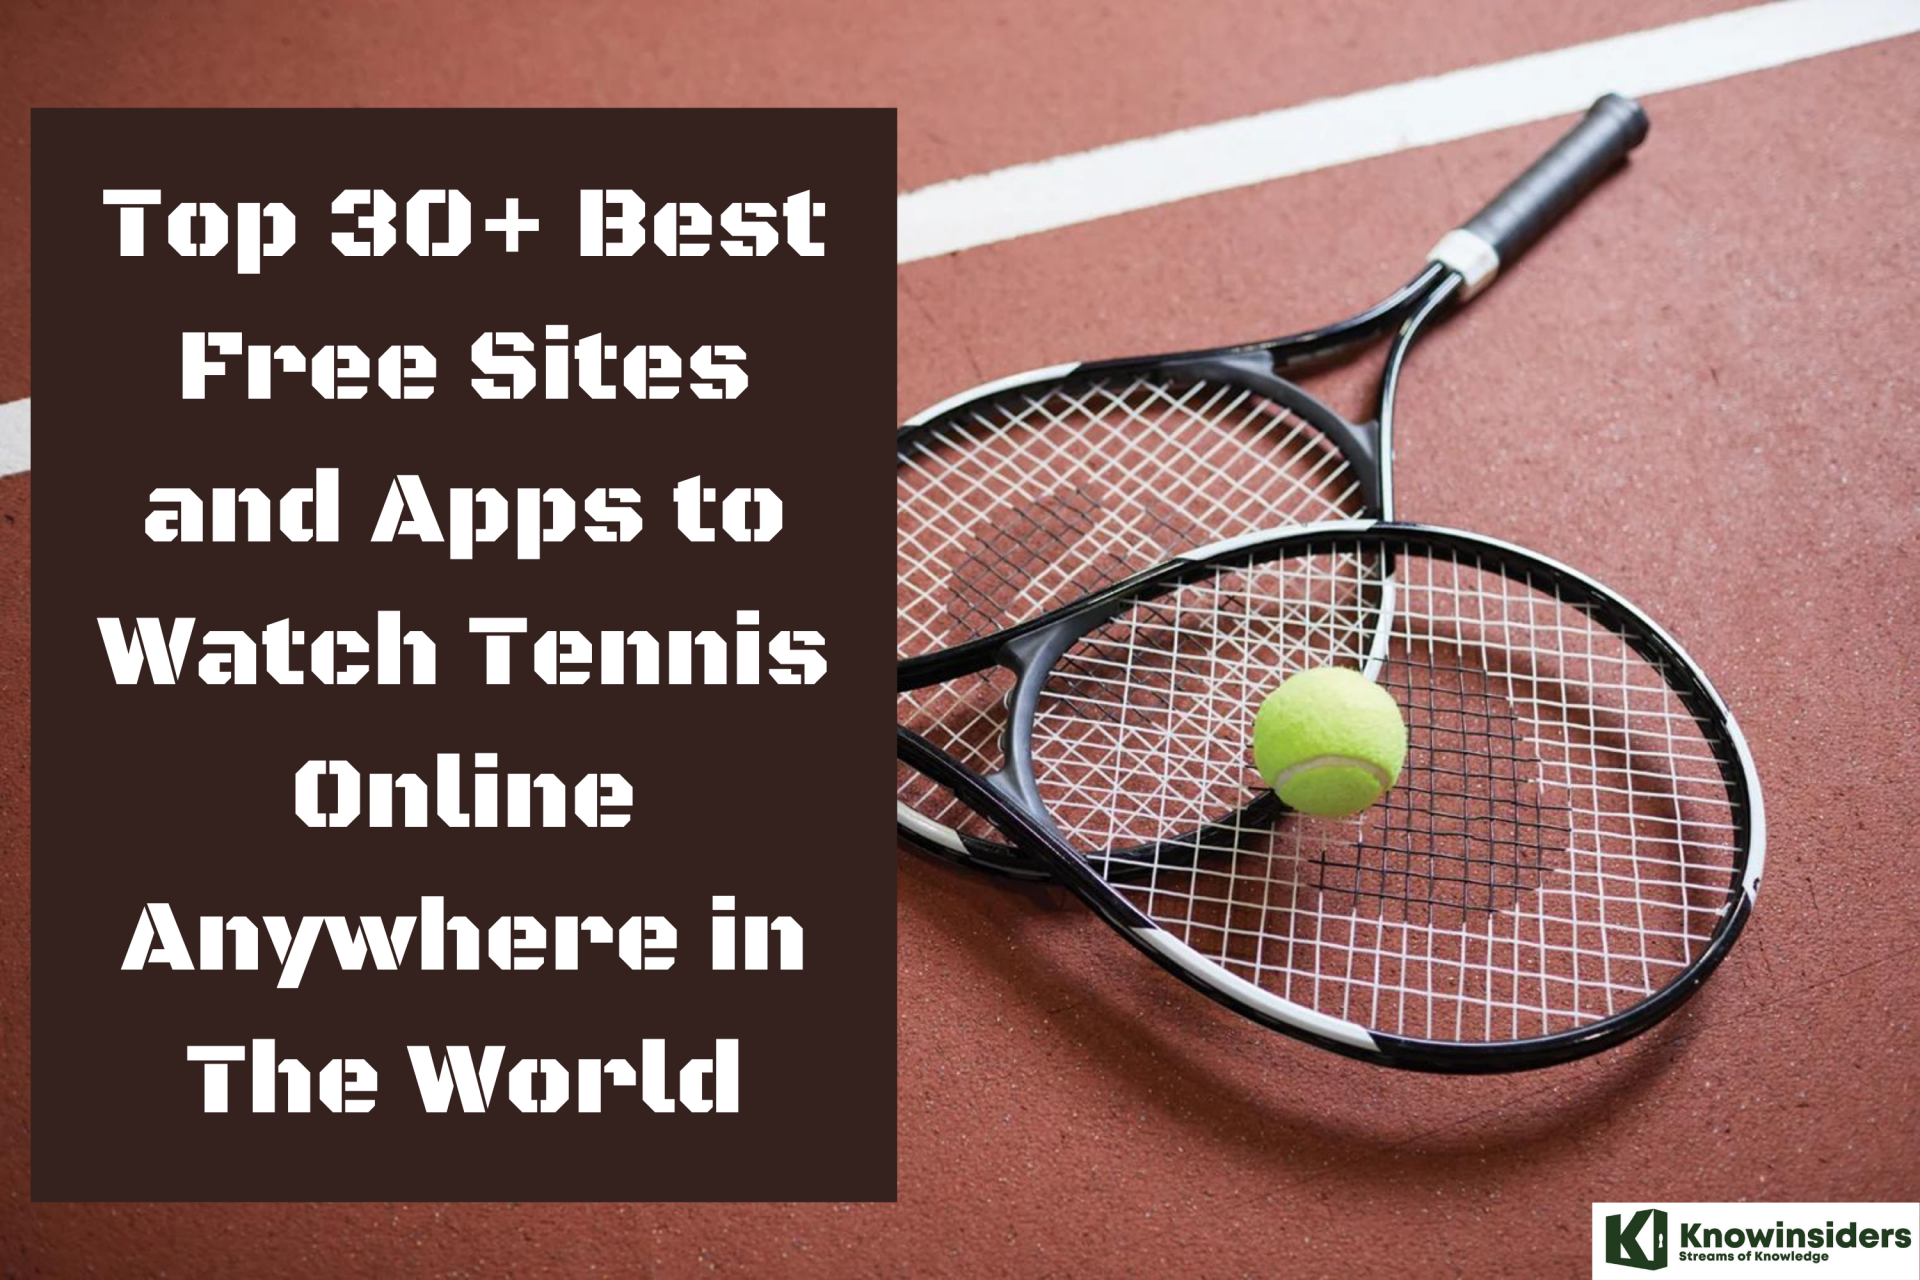 Top 30+ Best Free Sites and Apps to Watch Tennis Online Anywhere in The World